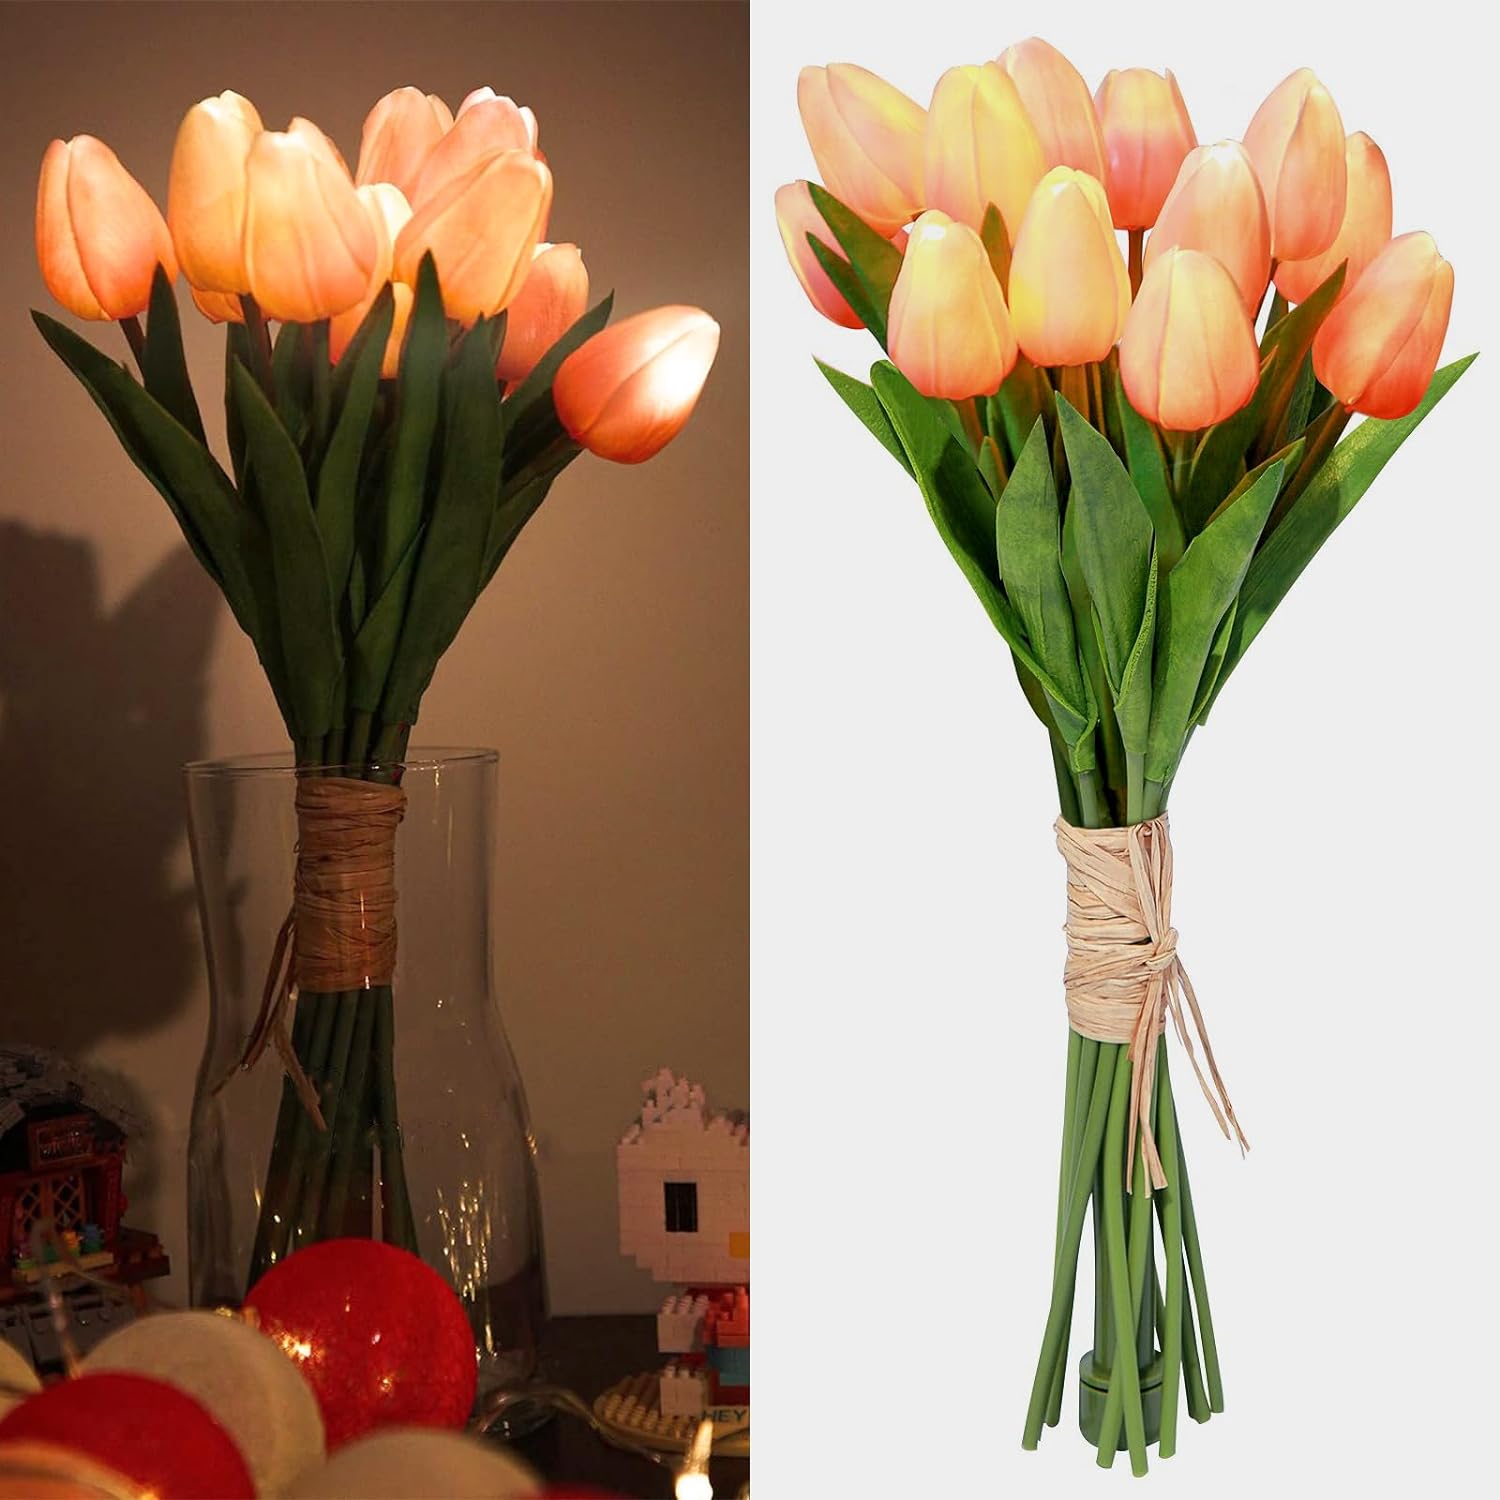 Minidiva 12 pcs Tulips Artificial Flowers with LED Light, Real Touch Fake Bouquet for Home Decor, Table Lamp, Night Lamp, Gift for Valentine' Day, Mother' Day, Christmas, Battery Powered